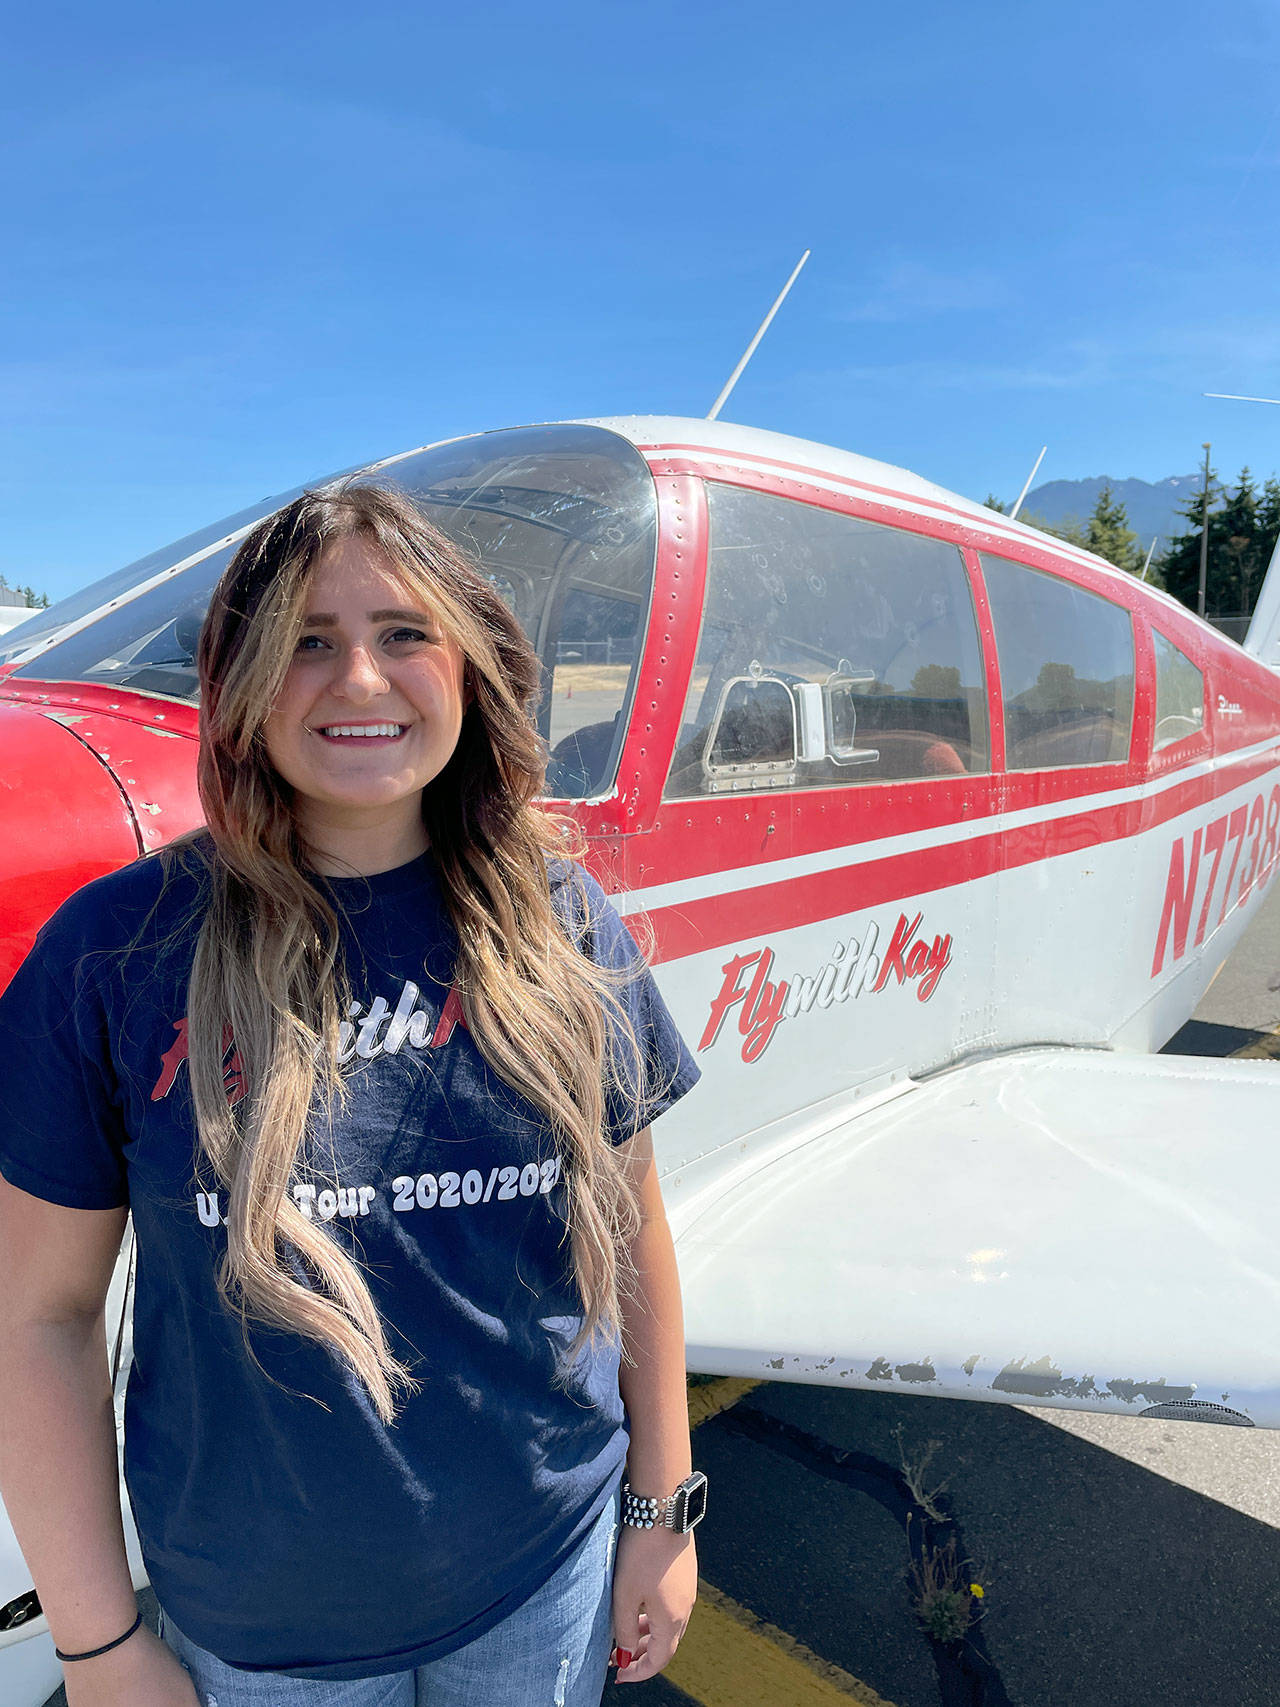 A TikTok influencer who goes by the pseudonym Kay Hall visited Port Angeles last week, arriving on her plane, Lil Red. (Scott Gardinier/Peninsula Daily News)